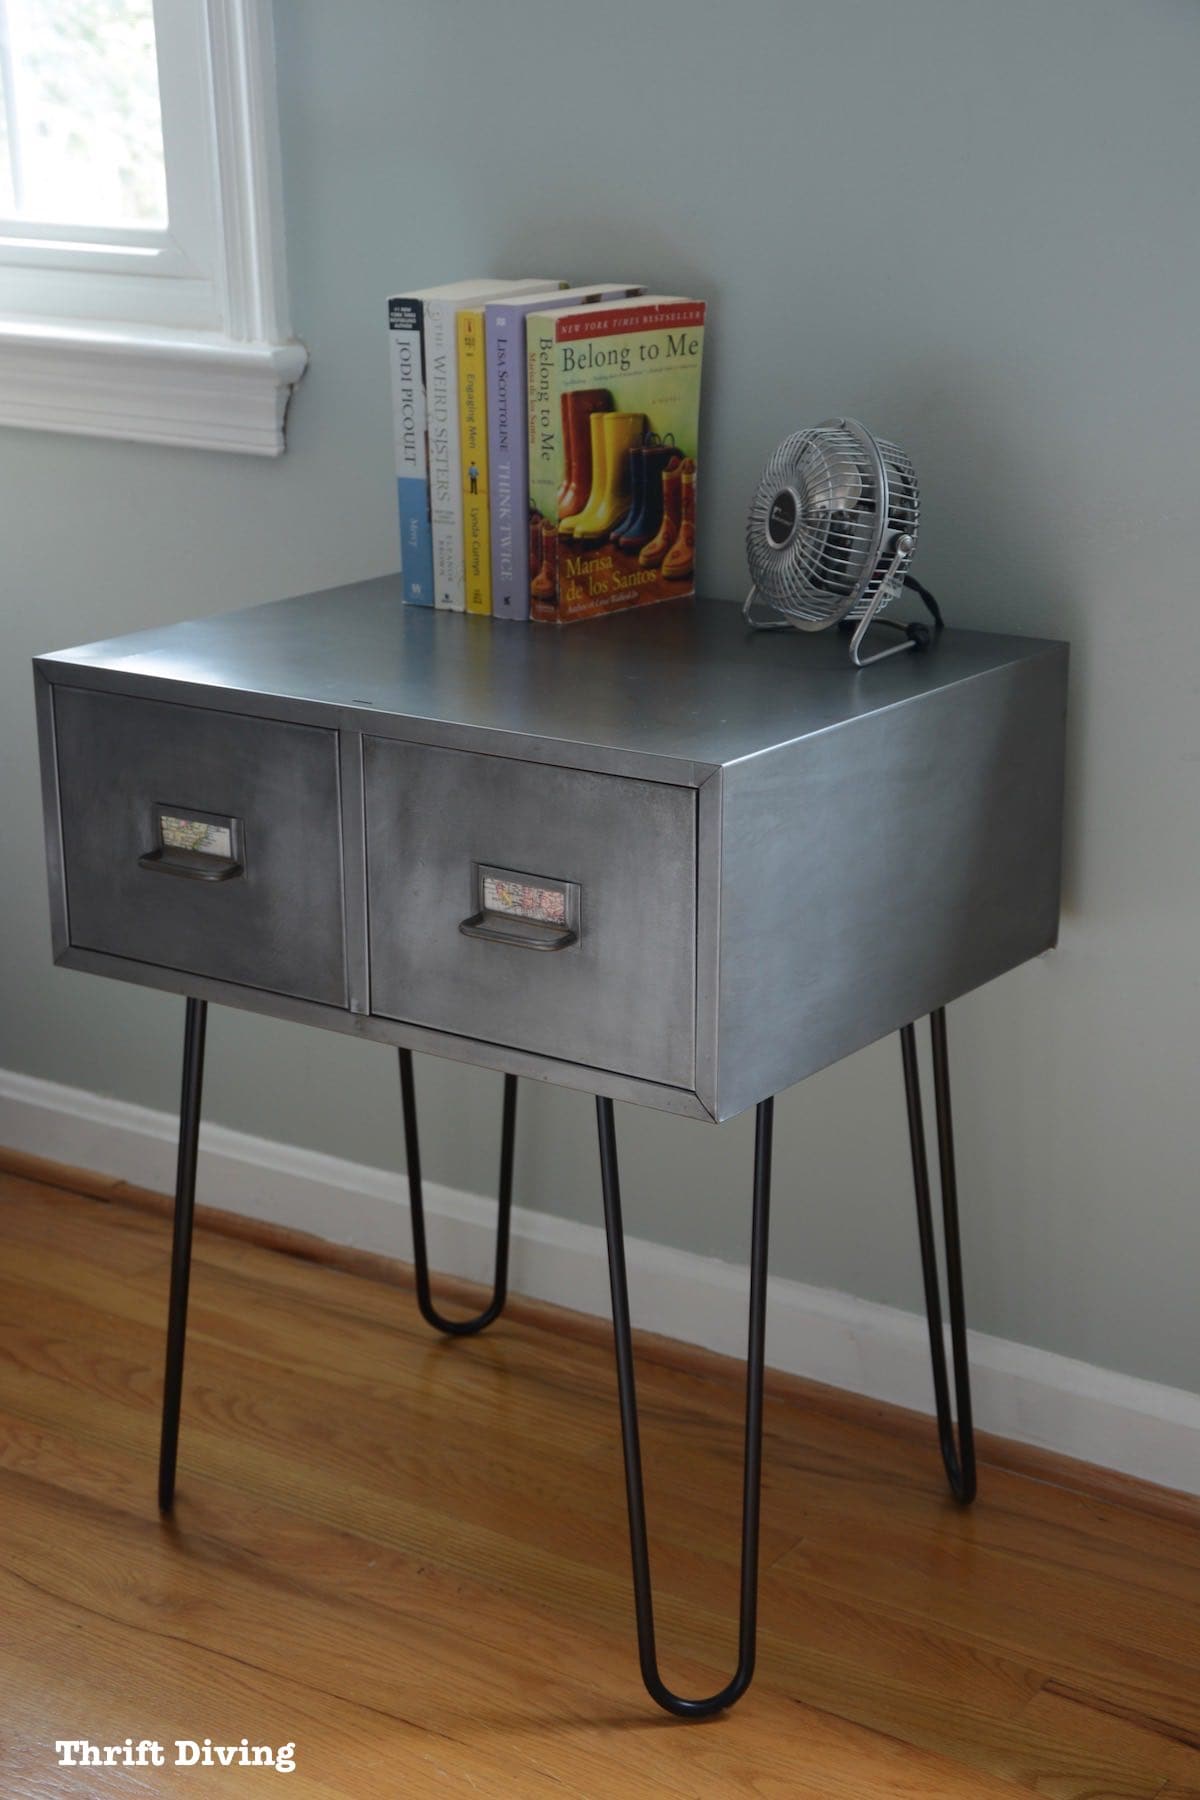 Vintage metal cabinets can be turned into industrial furniture with hairpin legs and stripped metal. | Thrift Diving